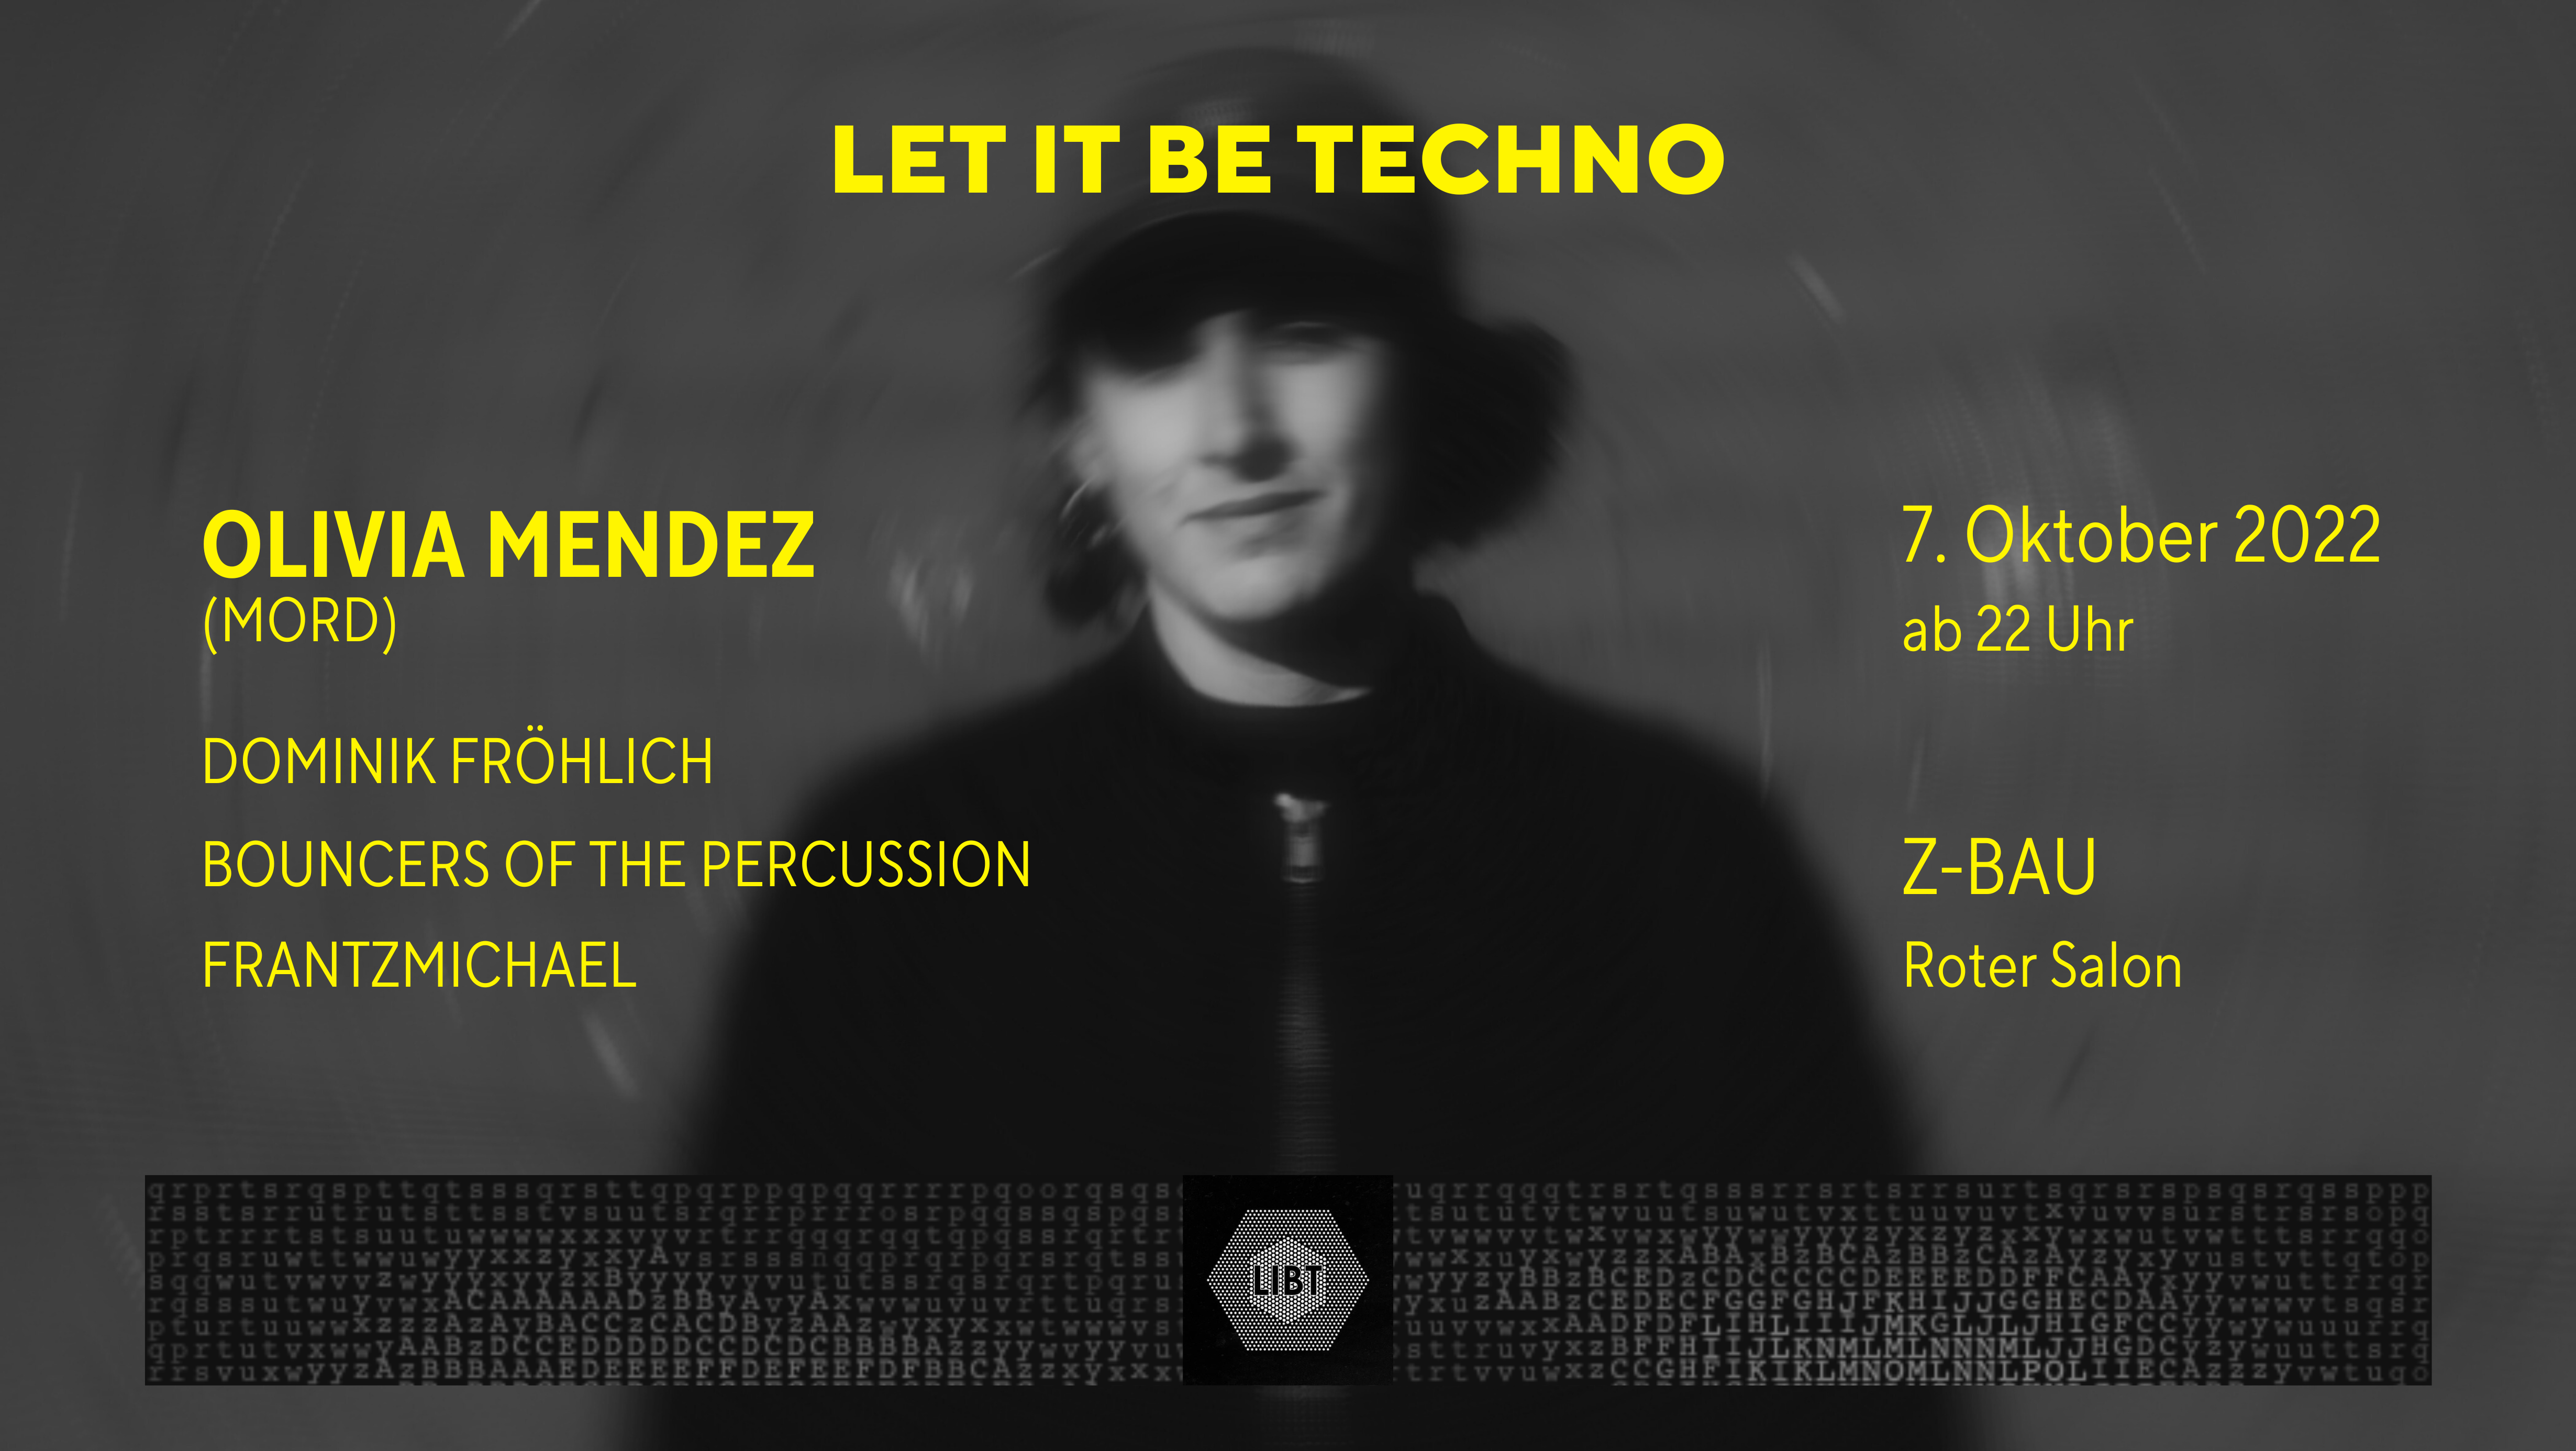 Let it be Techno - Libt - フライヤー表